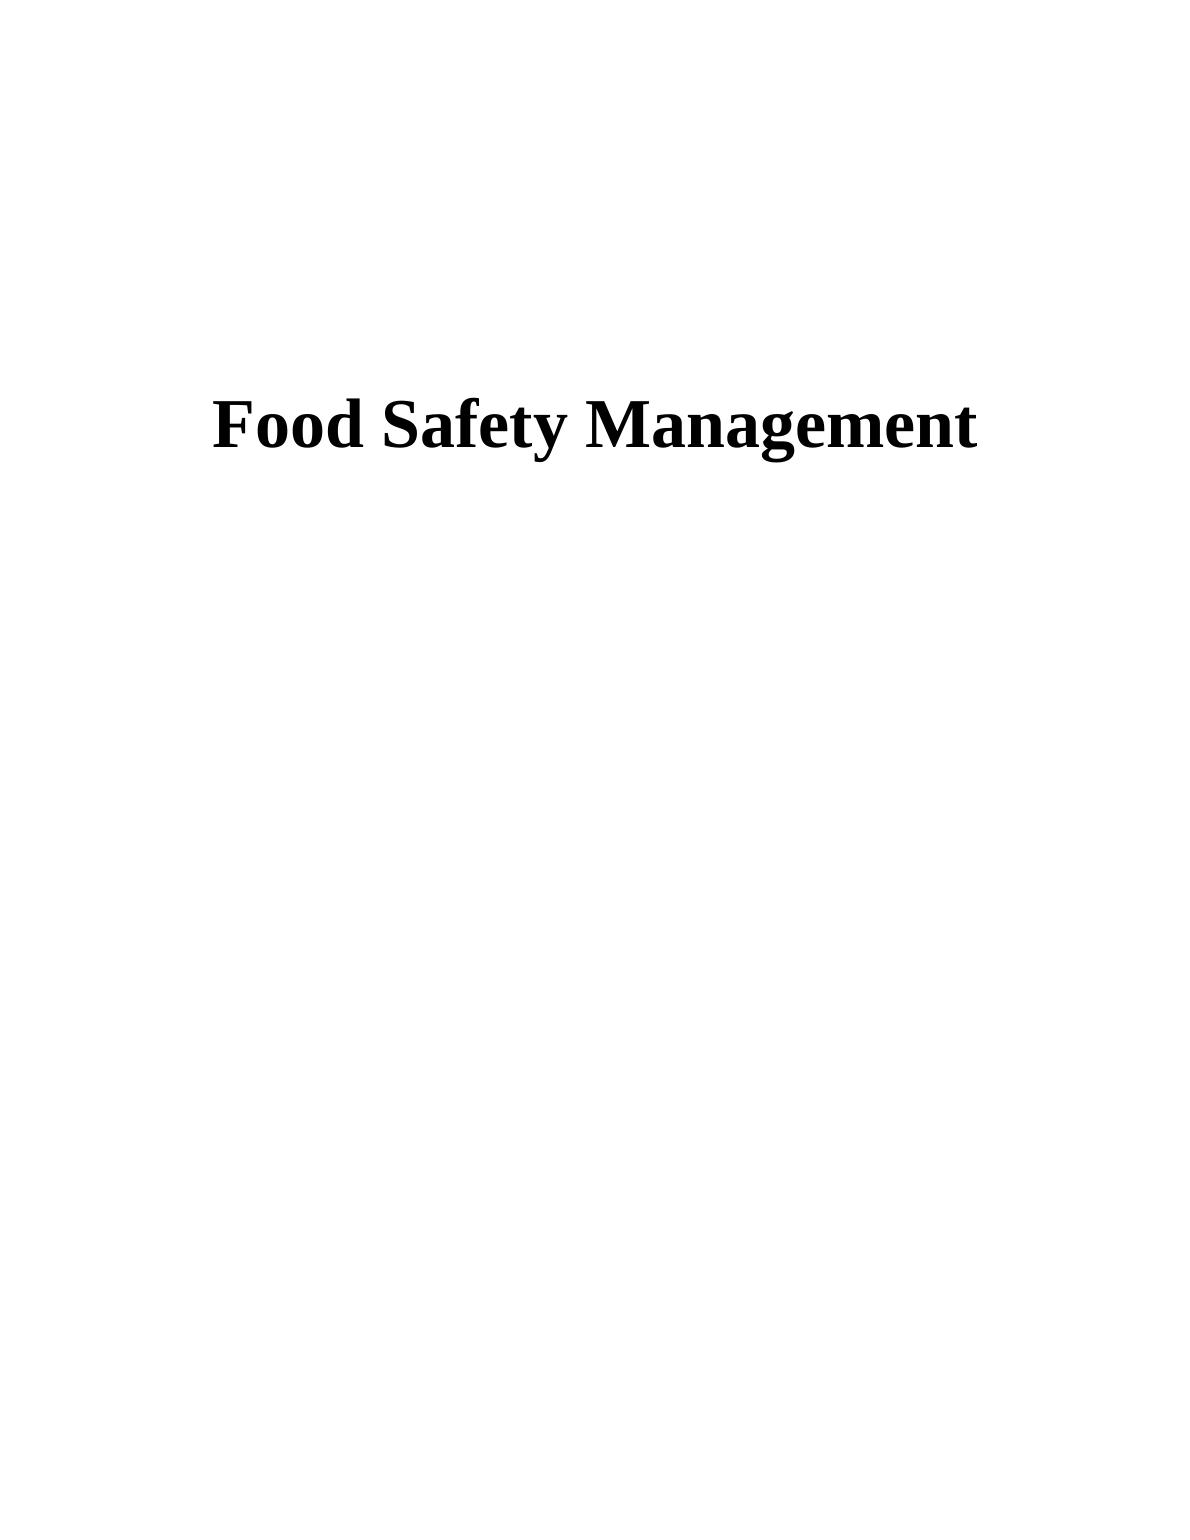 Towards the safe storage of food_1